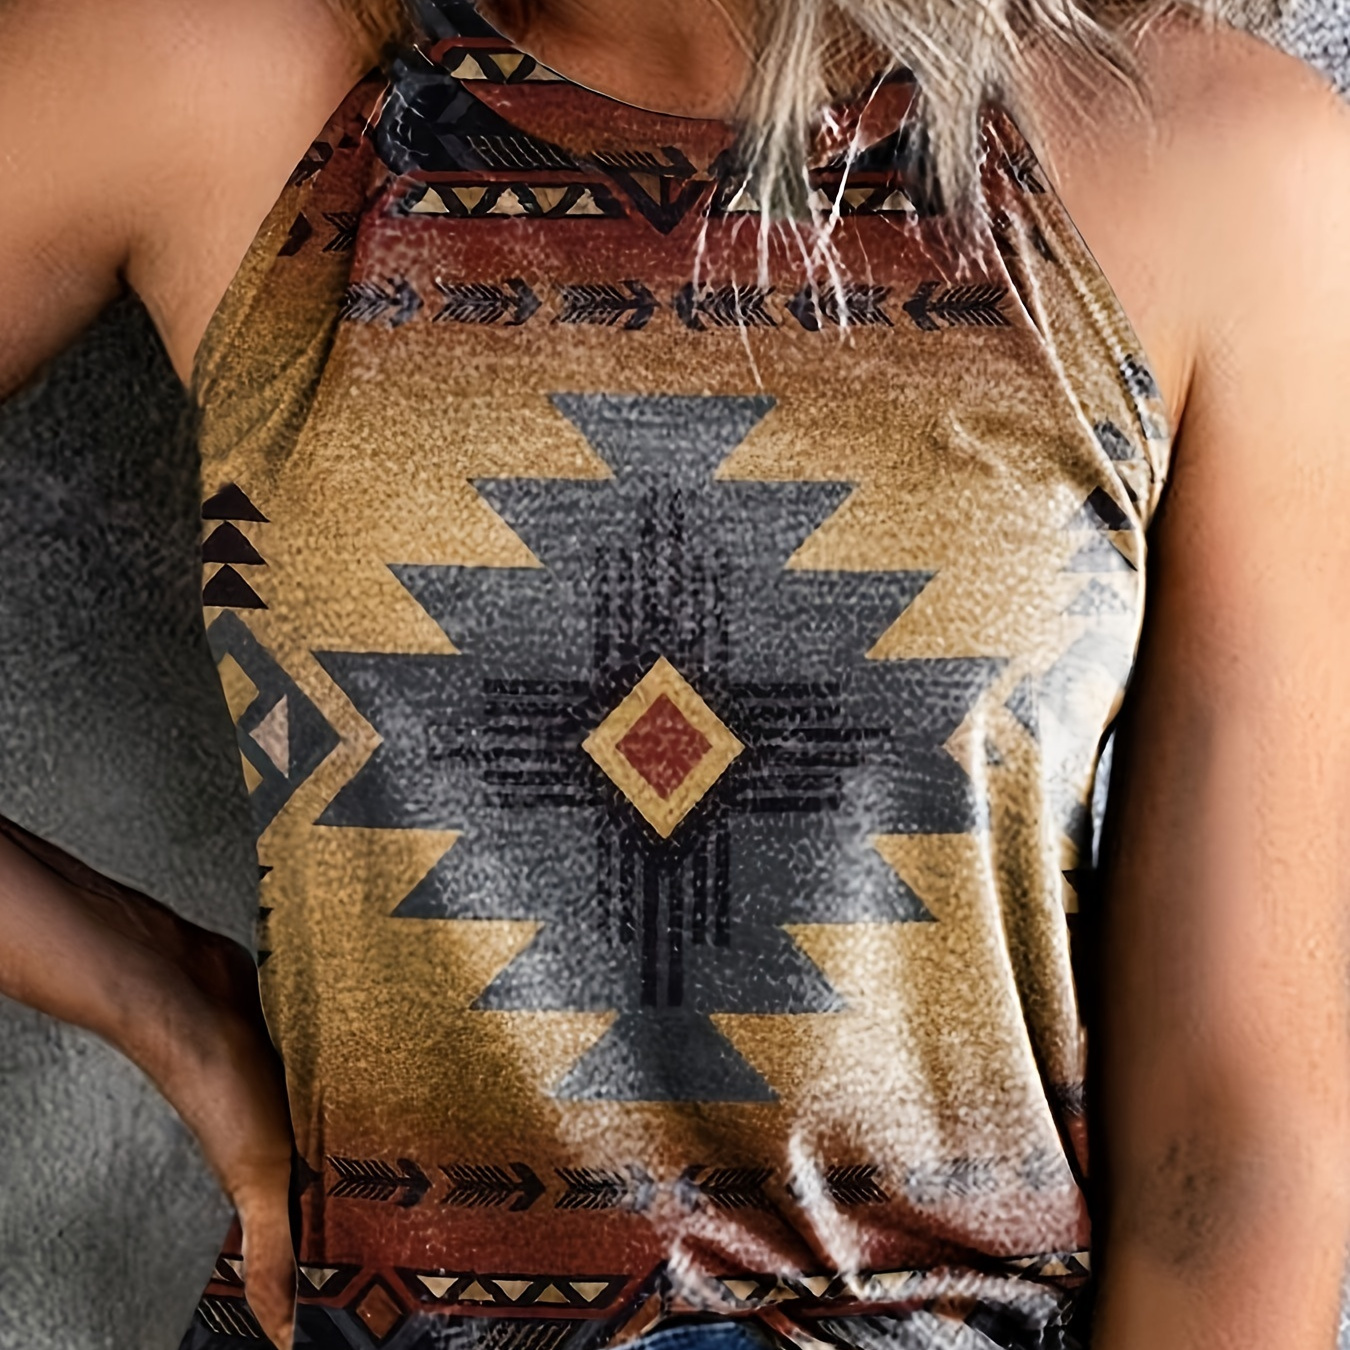 

Aztec Print Round Neck Cami Top, Casual Loose Fashion Sleeveless Summer Cami Top, Women's Clothing